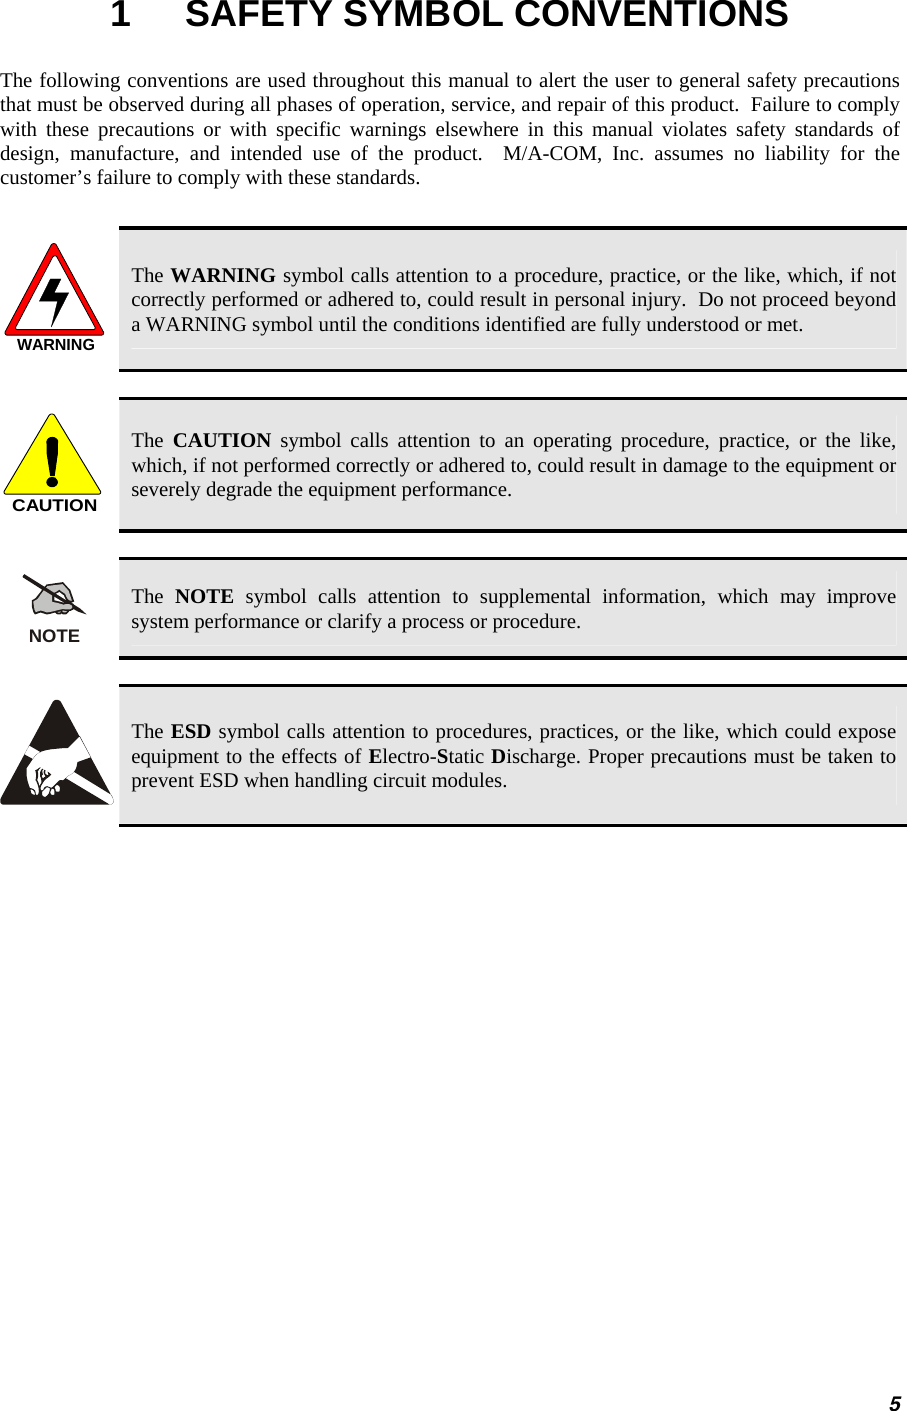 1  SAFETY SYMBOL CONVENTIONS The following conventions are used throughout this manual to alert the user to general safety precautions that must be observed during all phases of operation, service, and repair of this product.  Failure to comply with these precautions or with specific warnings elsewhere in this manual violates safety standards of design, manufacture, and intended use of the product.  M/A-COM, Inc. assumes no liability for the customer’s failure to comply with these standards.  WARNING The WARNING symbol calls attention to a procedure, practice, or the like, which, if not correctly performed or adhered to, could result in personal injury.  Do not proceed beyond a WARNING symbol until the conditions identified are fully understood or met.   CAUTION The  CAUTION symbol calls attention to an operating procedure, practice, or the like, which, if not performed correctly or adhered to, could result in damage to the equipment or severely degrade the equipment performance.   NOTE The  NOTE symbol calls attention to supplemental information, which may improve system performance or clarify a process or procedure.    The ESD symbol calls attention to procedures, practices, or the like, which could expose equipment to the effects of Electro-Static Discharge. Proper precautions must be taken to prevent ESD when handling circuit modules.  5 